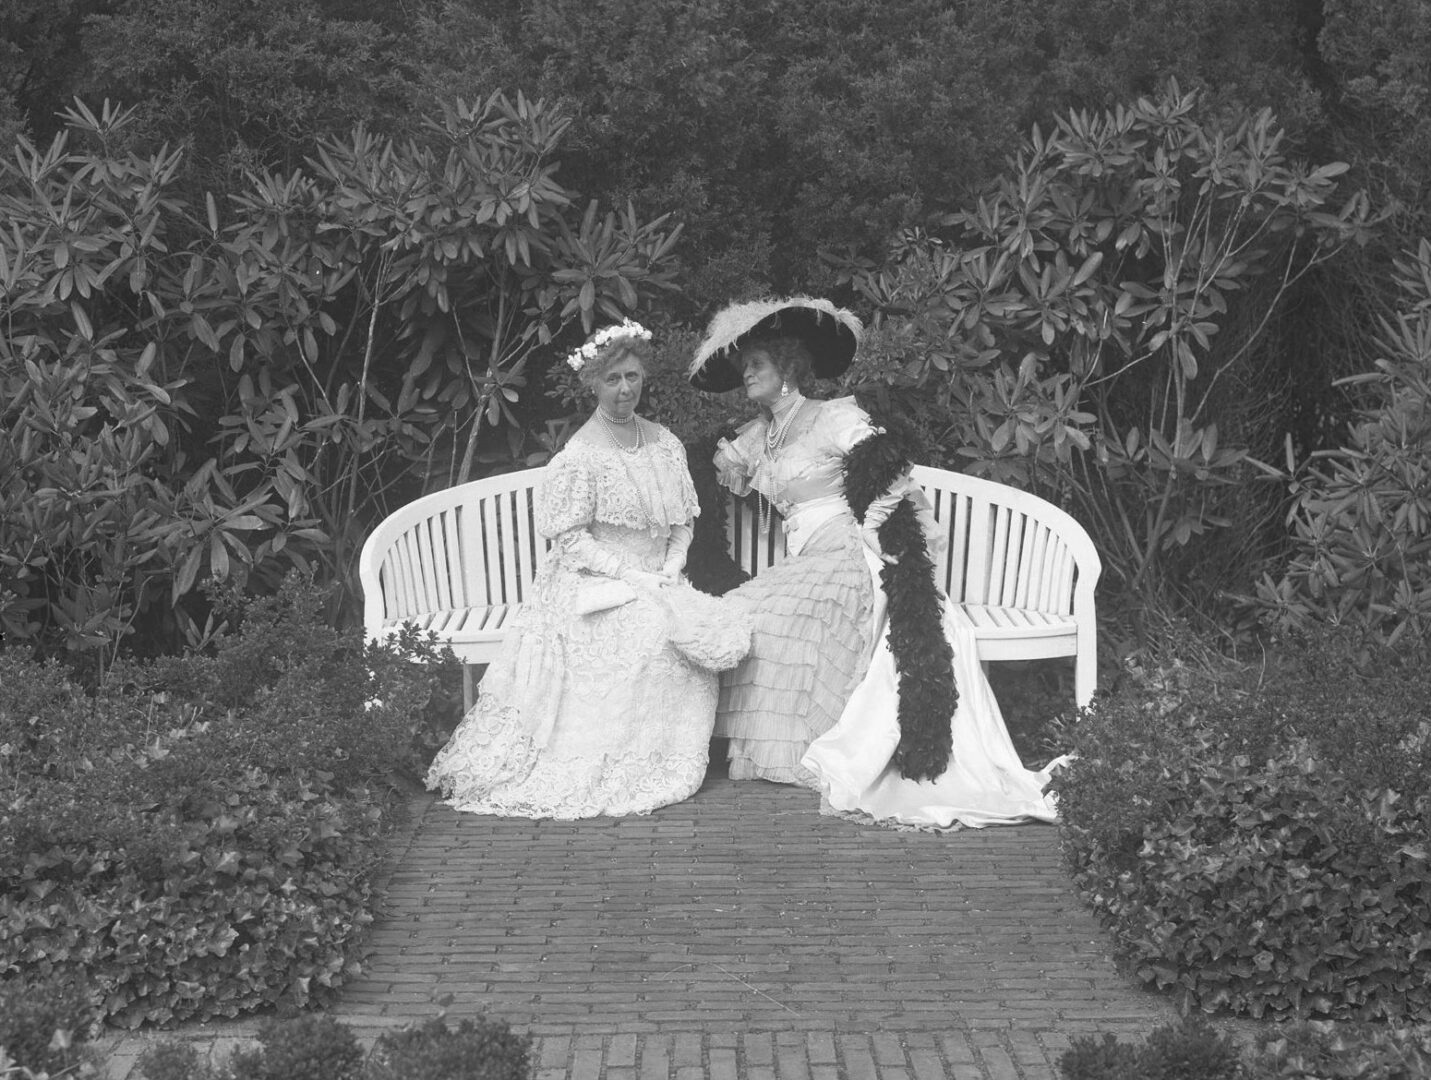 Two women sitting on a bench in a garden.